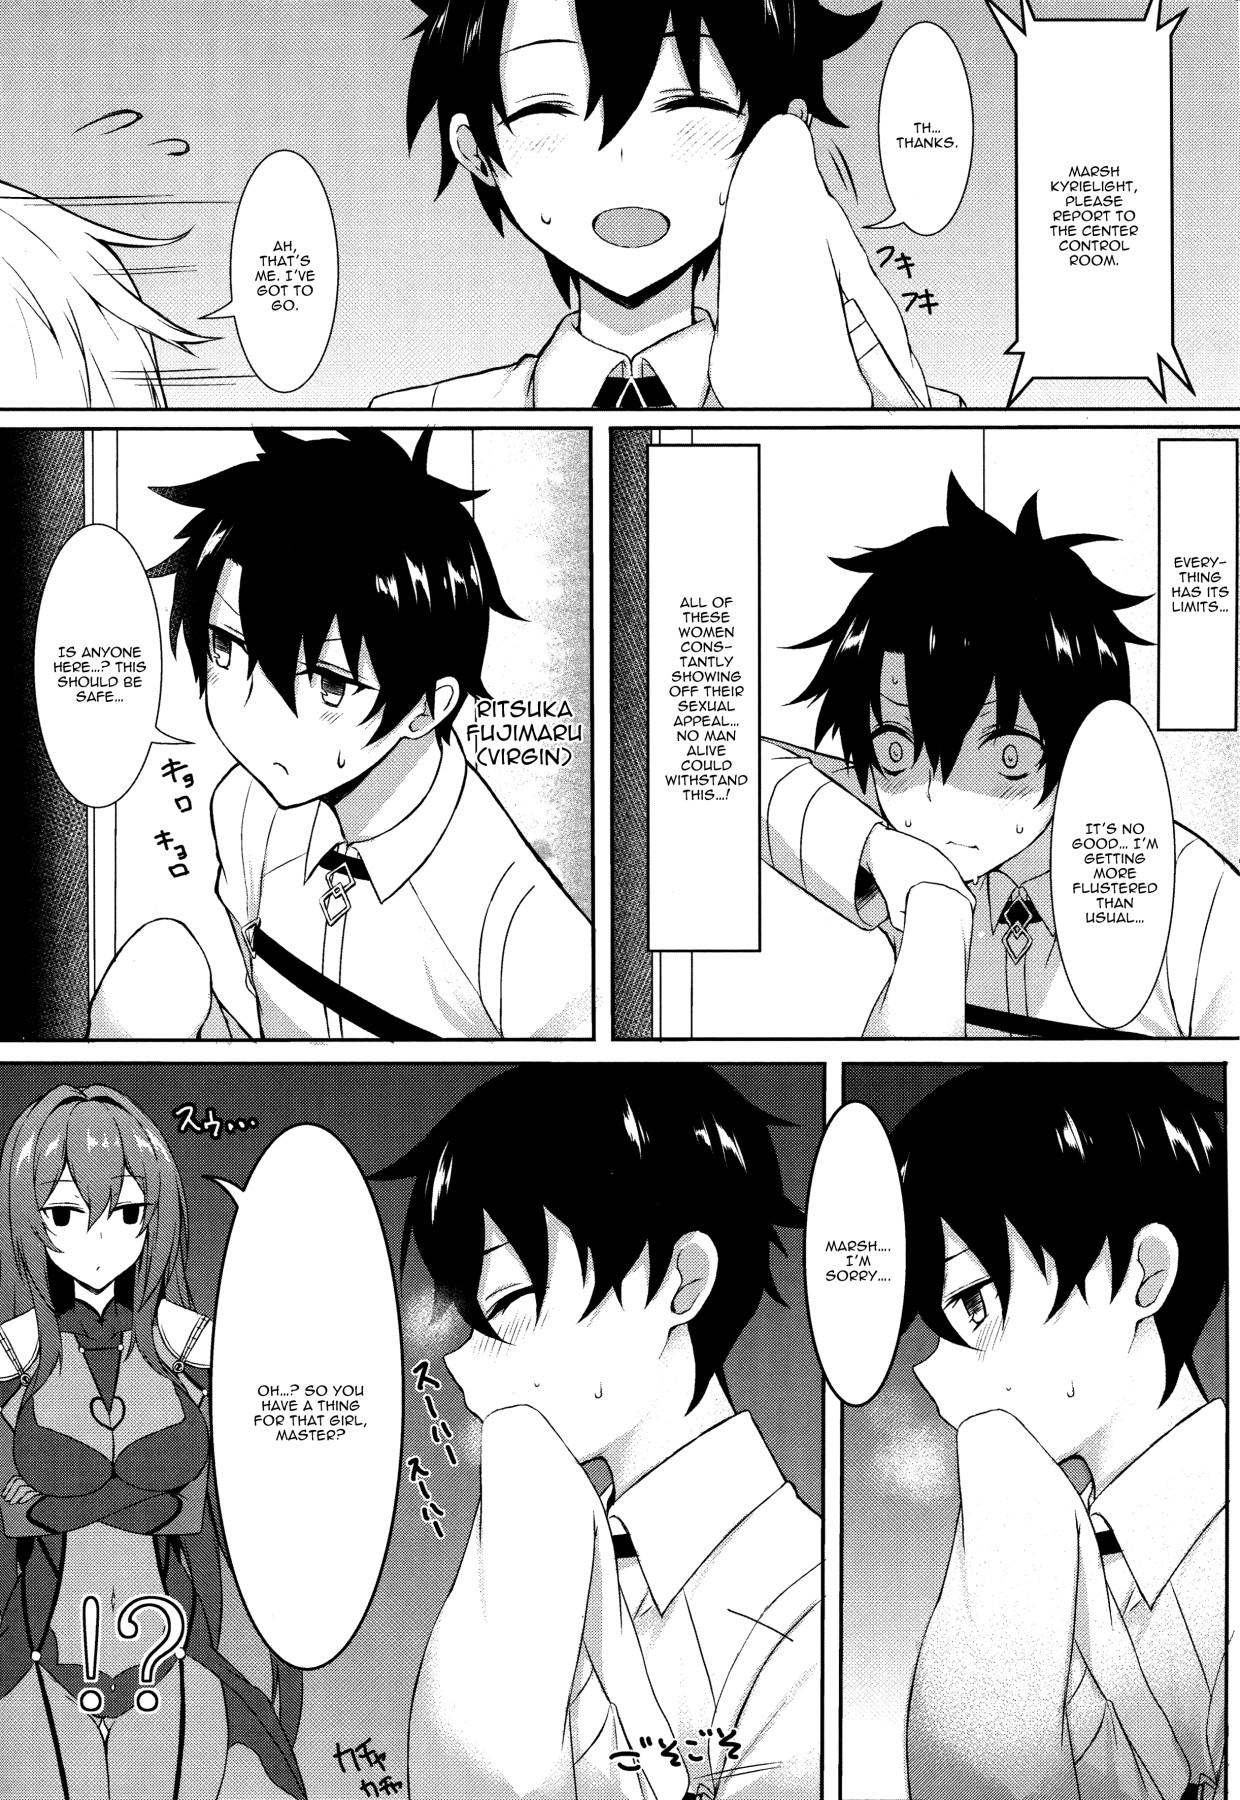 Pounded Nukiuchi!! Shishou | Squeeze It out Shishou!! - Fate grand order Facefuck - Page 4